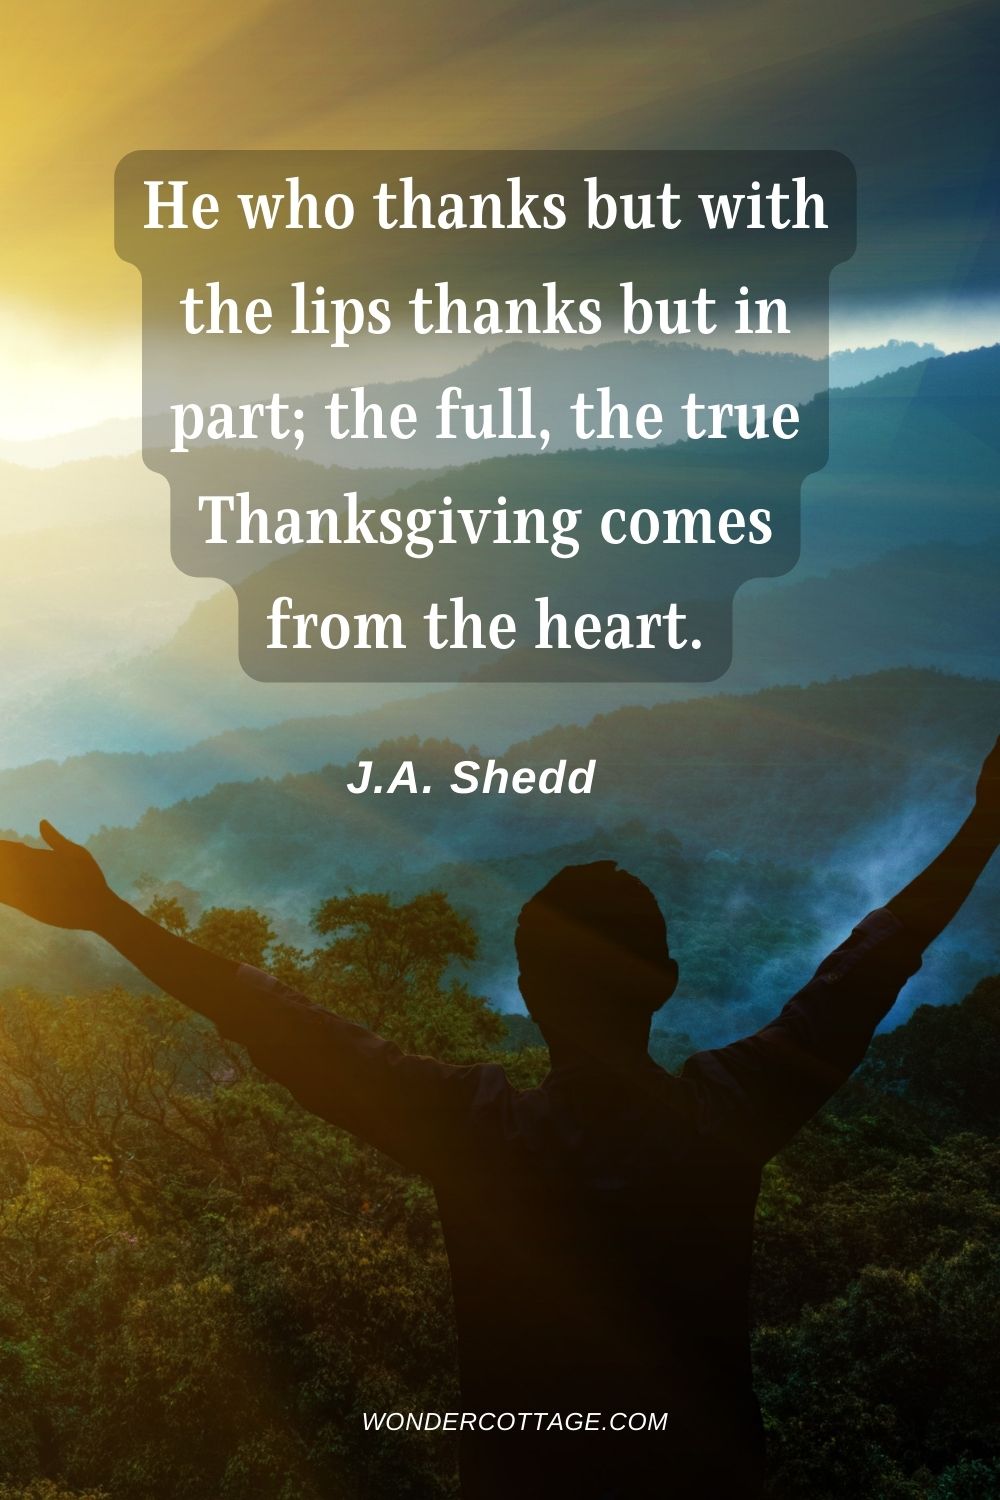 He who thanks but with the lips thanks but in part; the full, the true Thanksgiving comes from the heart. J.A. Shedd